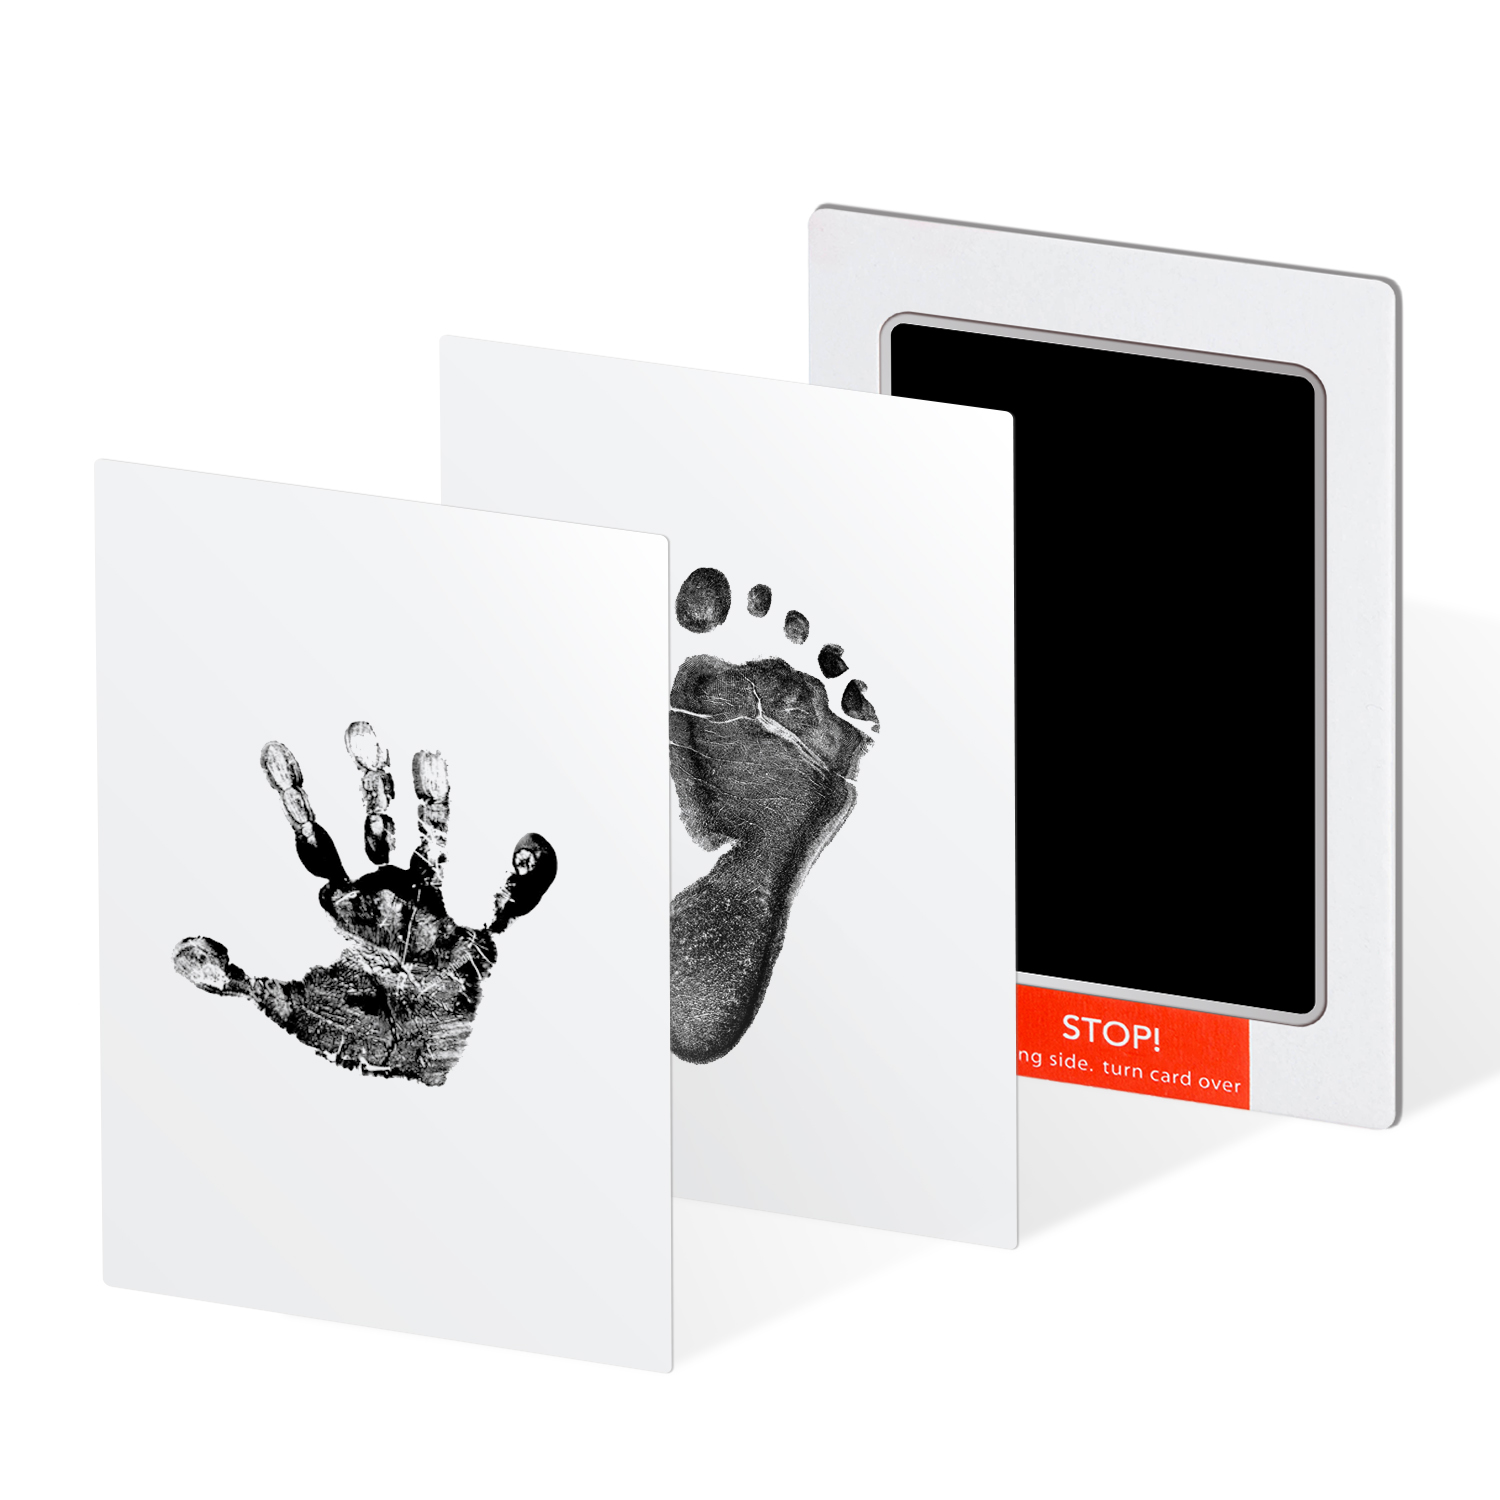 Black and Blue Ink Pads and Cards, Baby Handprint and Footprint